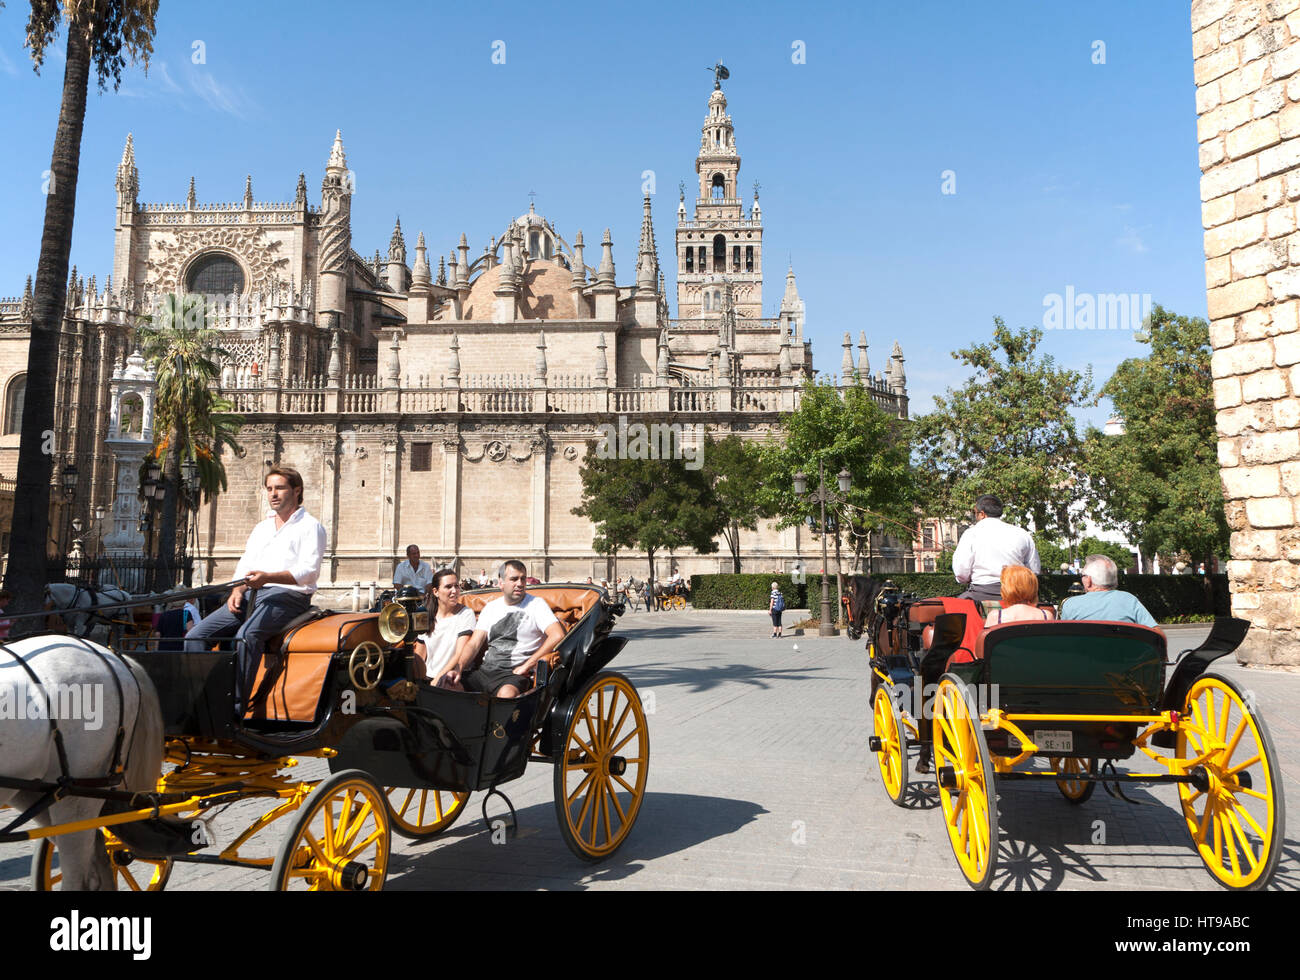 Horse and carriage rides for tourists in the historic central area near the cathedral, Seville, Spain Stock Photo